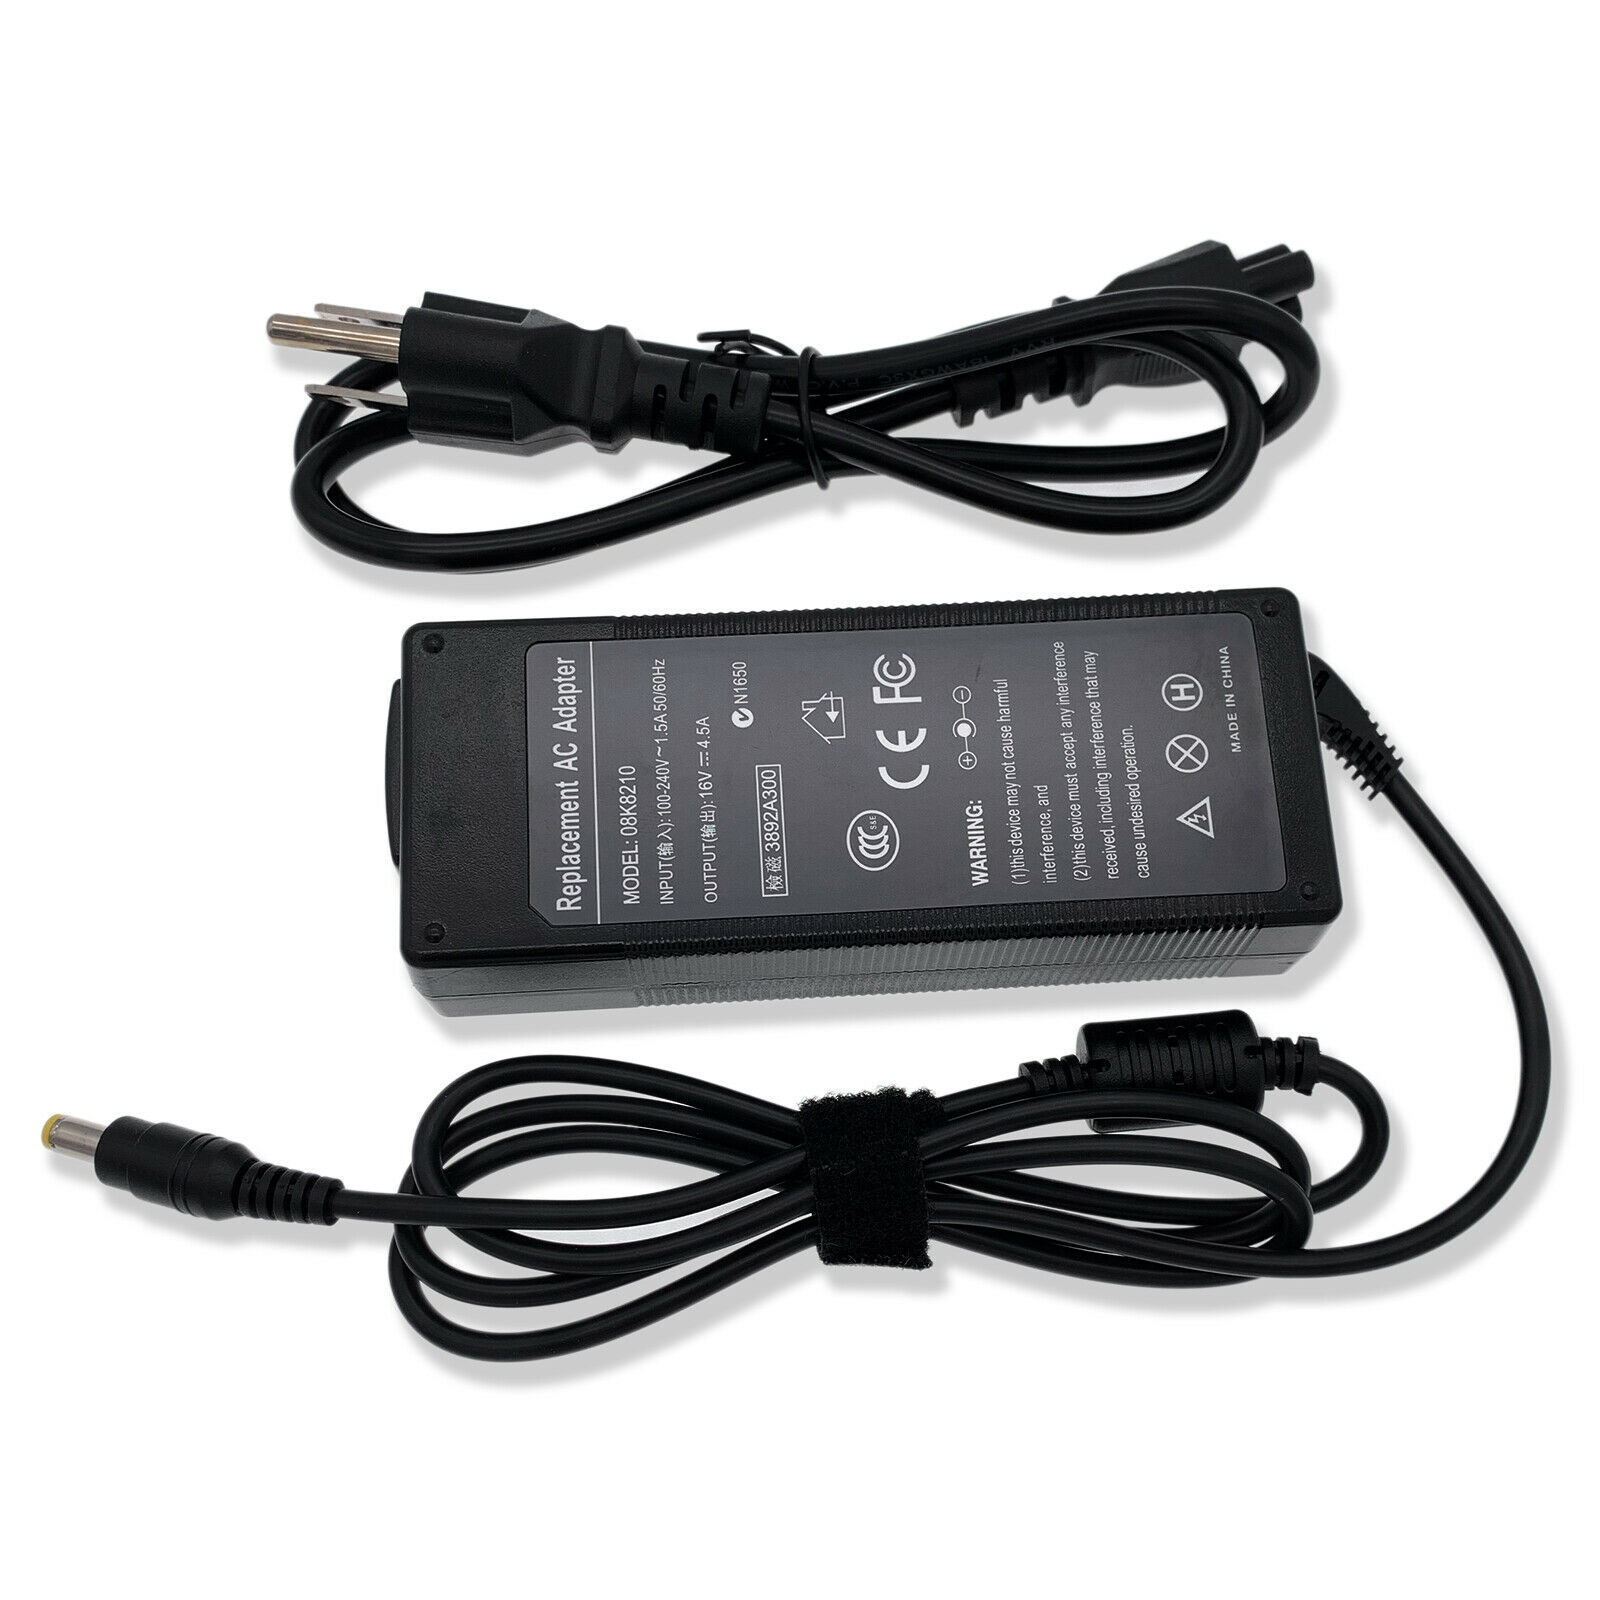 AC Adapter Charger For Panasonic Toughbook CF-19 CF-31 CF-52 CF-53 Power & Cord - image 1 of 6